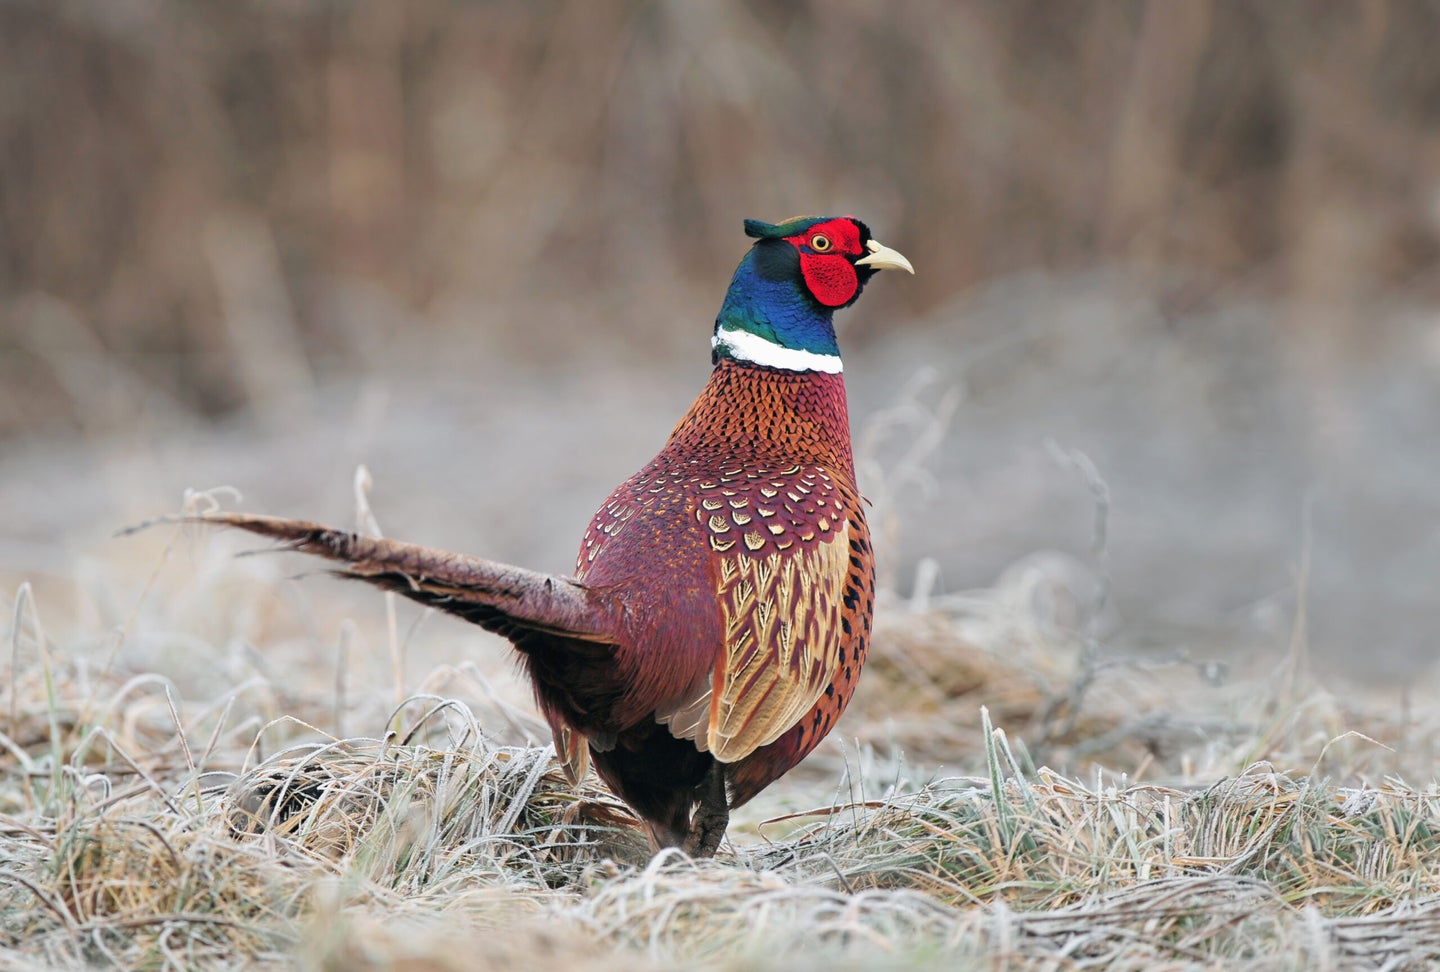 A male ringneck pheasant walks on the grass